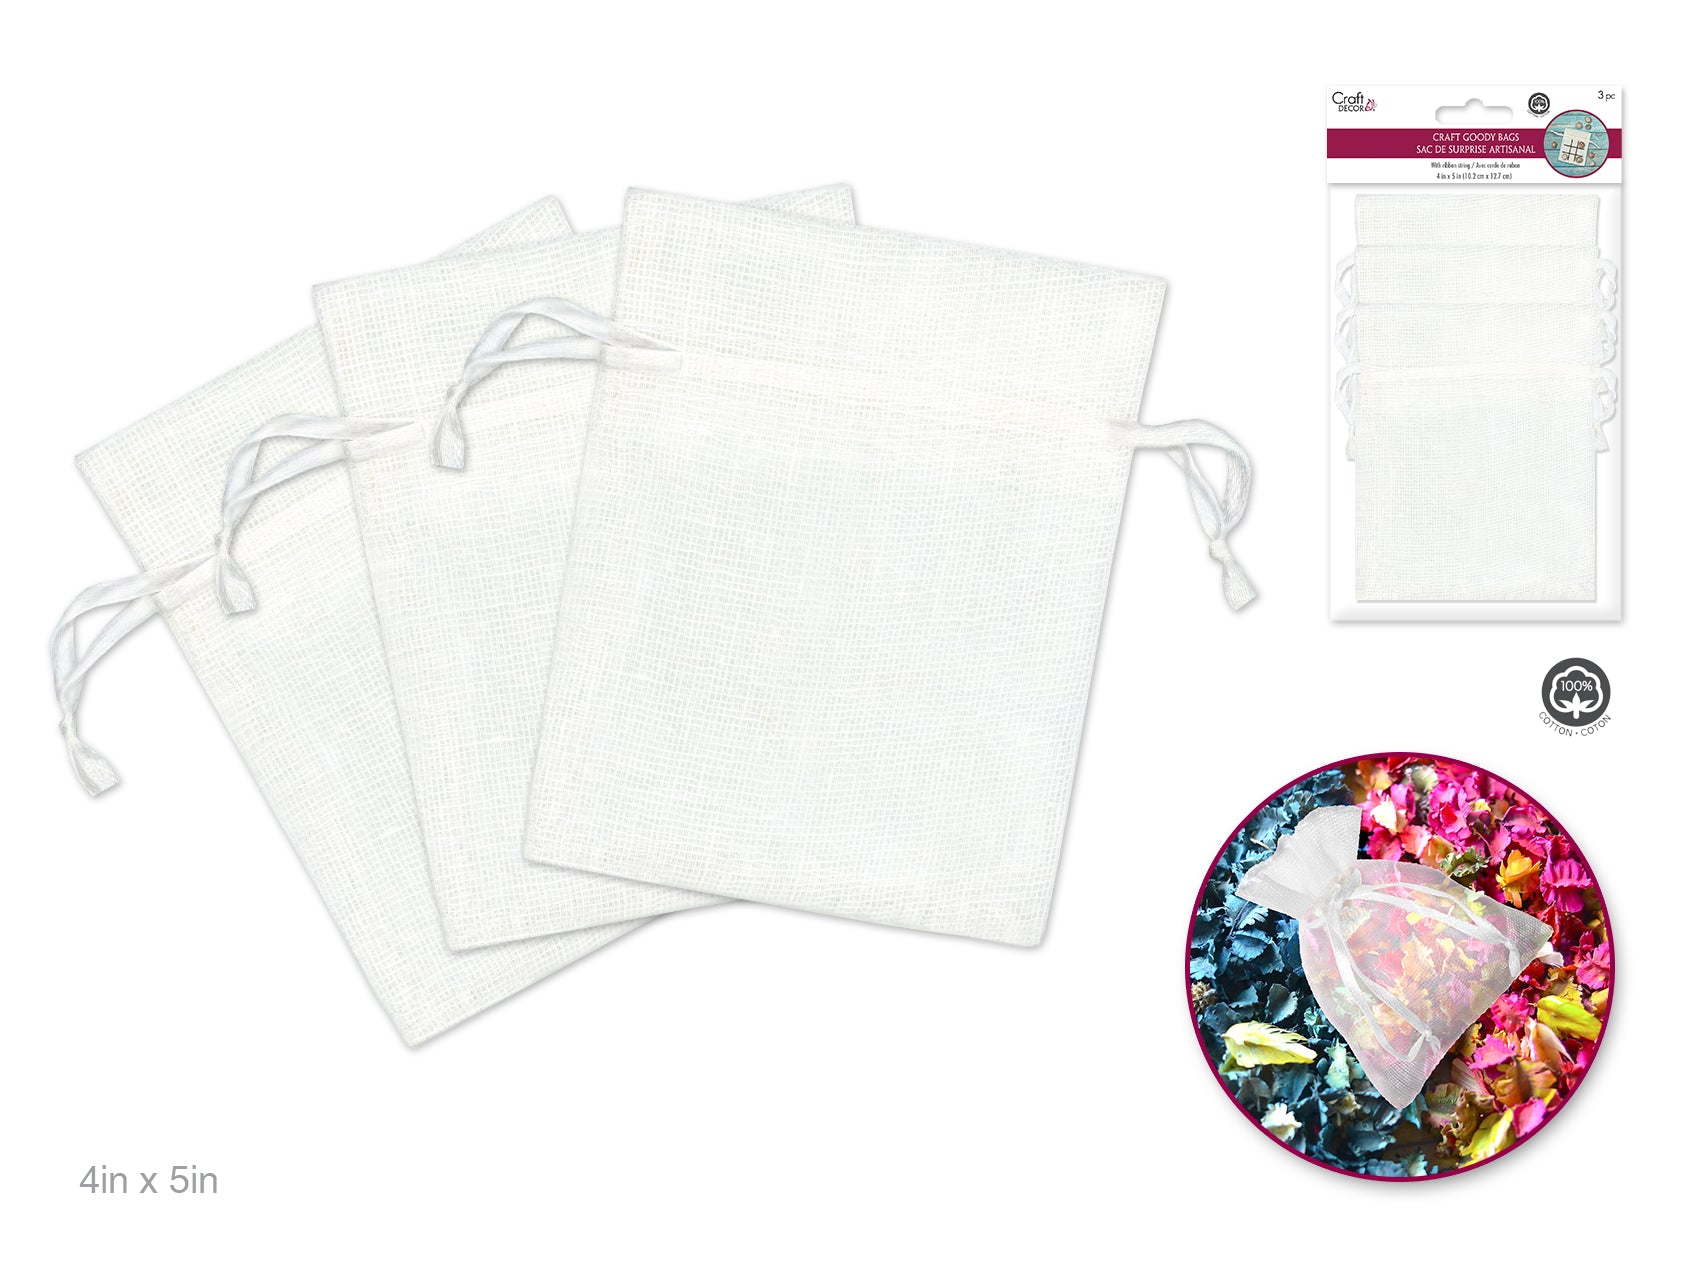 Craft Decor: Set of 3, 4"x5" Mesh Cotton Craft Goody Bags with Ribbon String in White